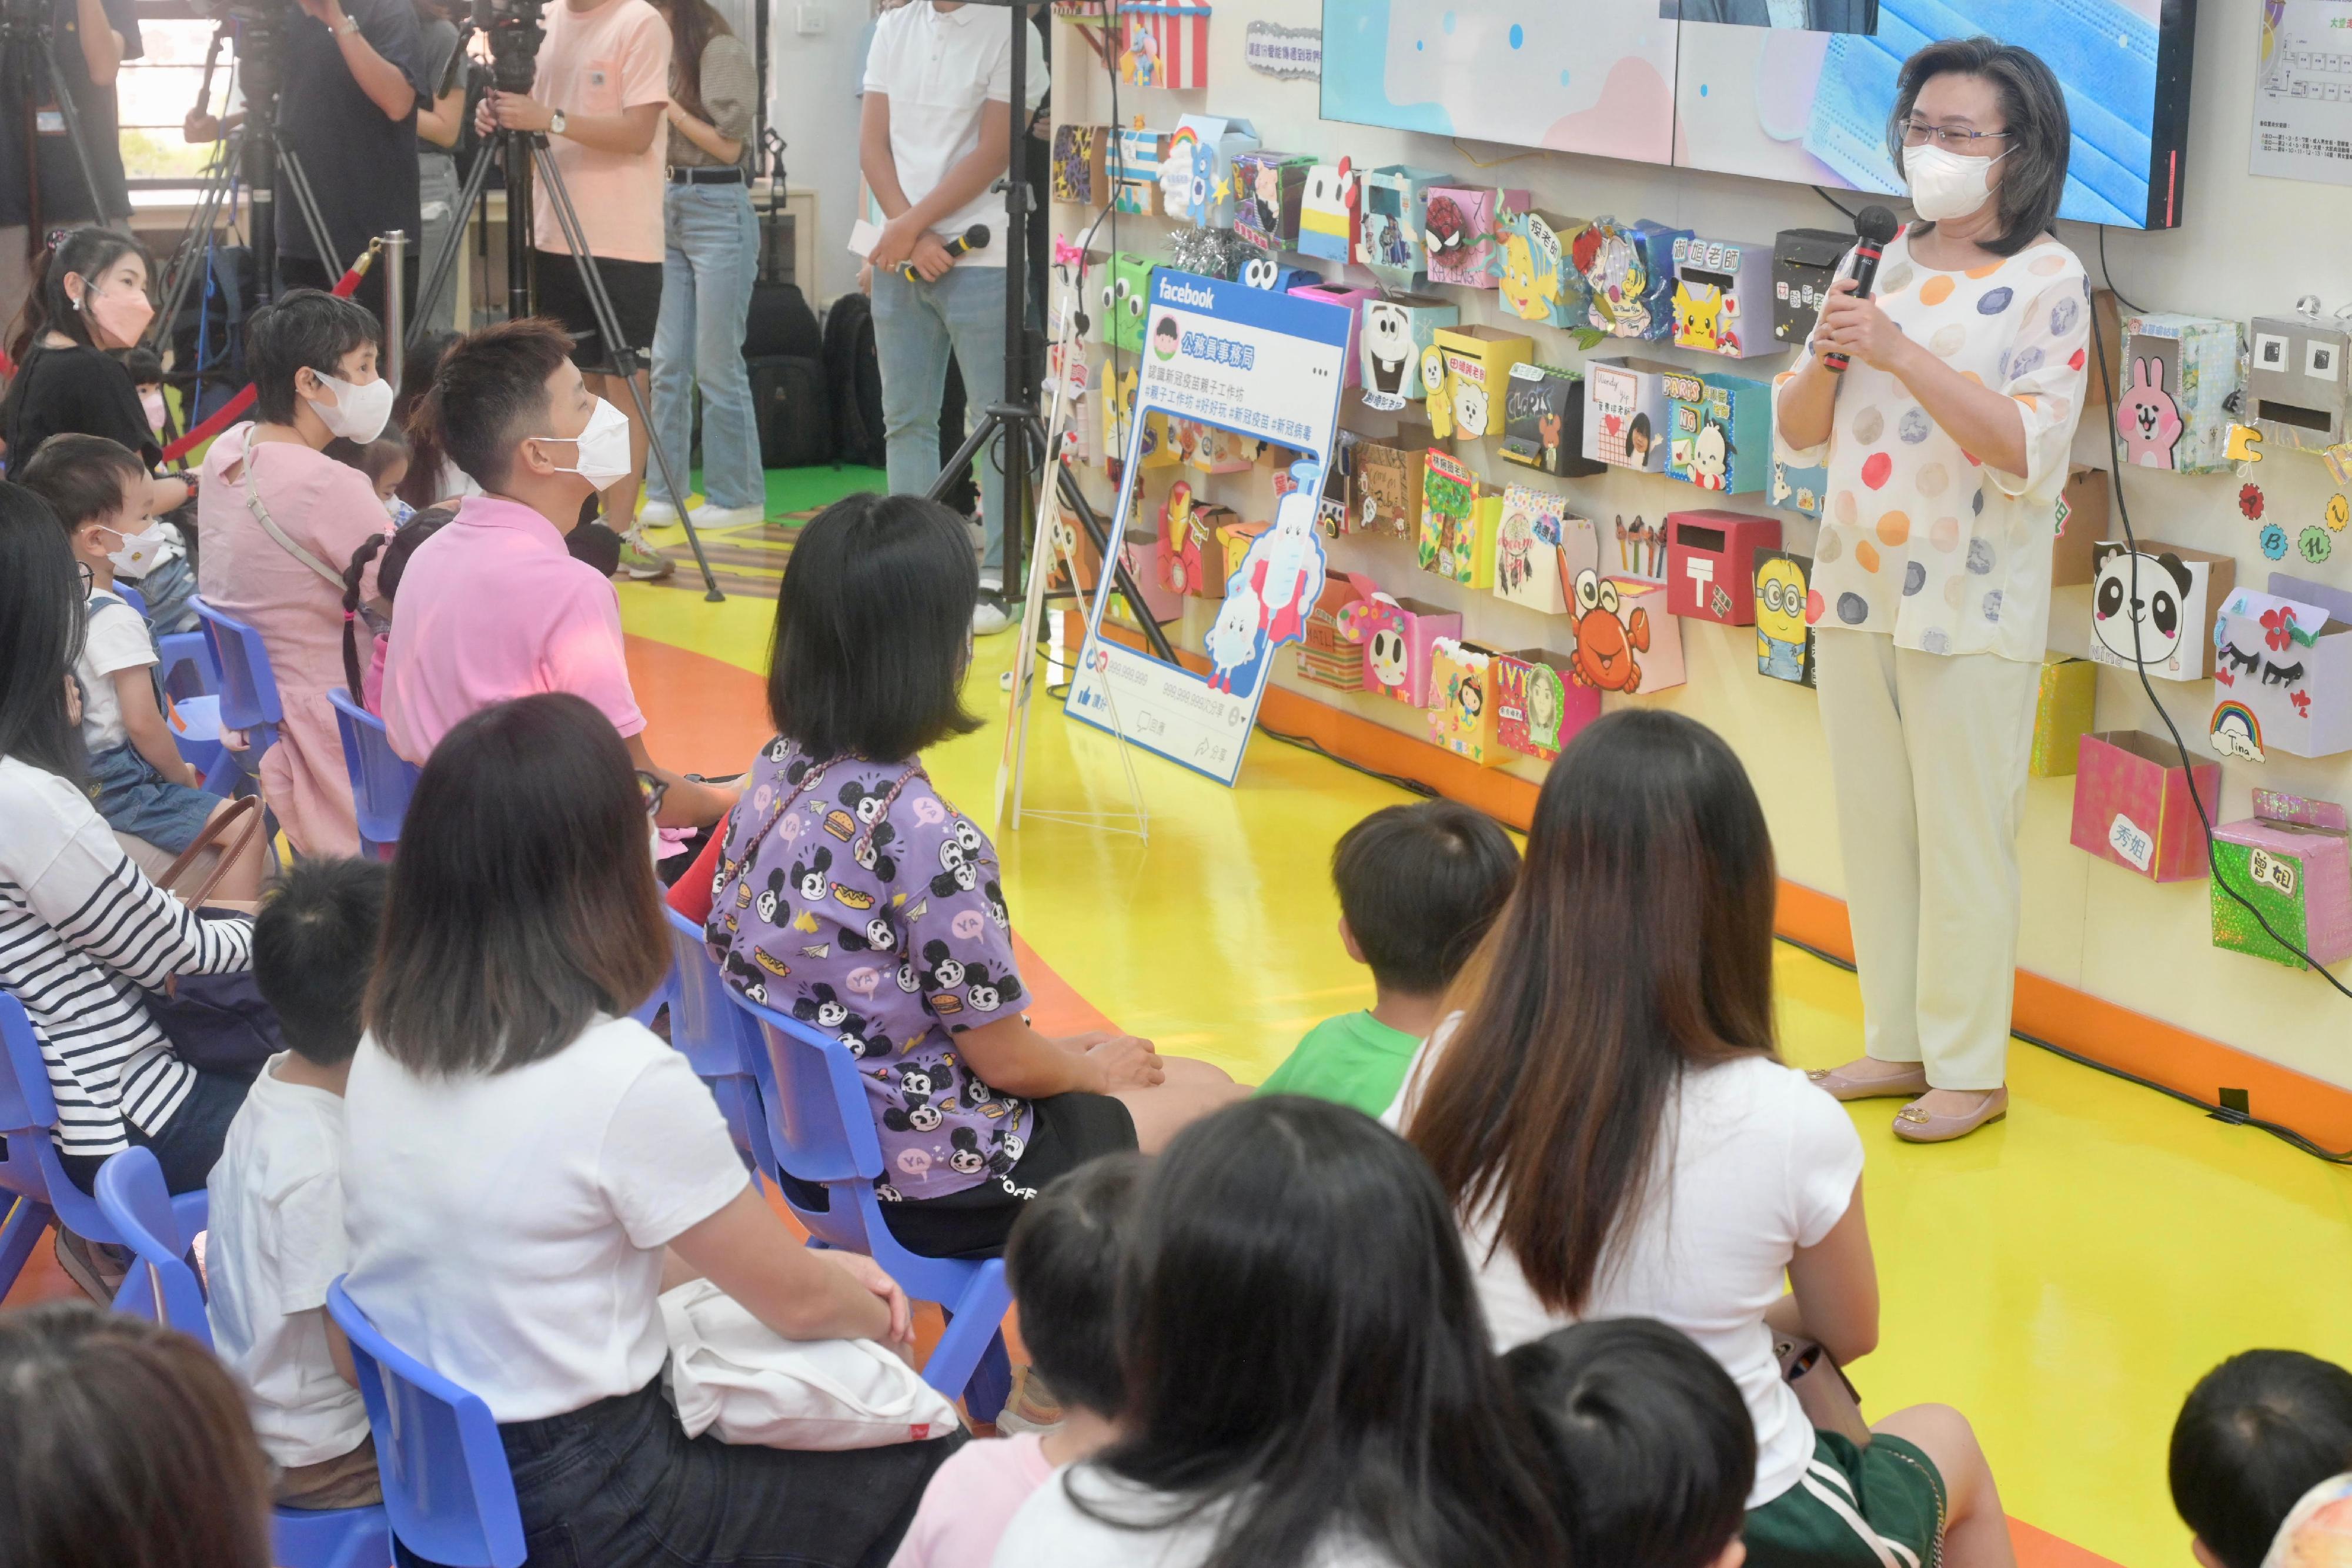 The Government is rolling out a series of promotion and education activities so that parents can have a deeper understanding on the importance of COVID-19 vaccination of children. The first parent-child workshop was conducted at a kindergarten in Ma On Shan today (September 24). Photo shows the Secretary for the Civil Service, Mrs Ingrid Yeung, appealing to parents to bring their young children to receive COVID-19 vaccination early.
